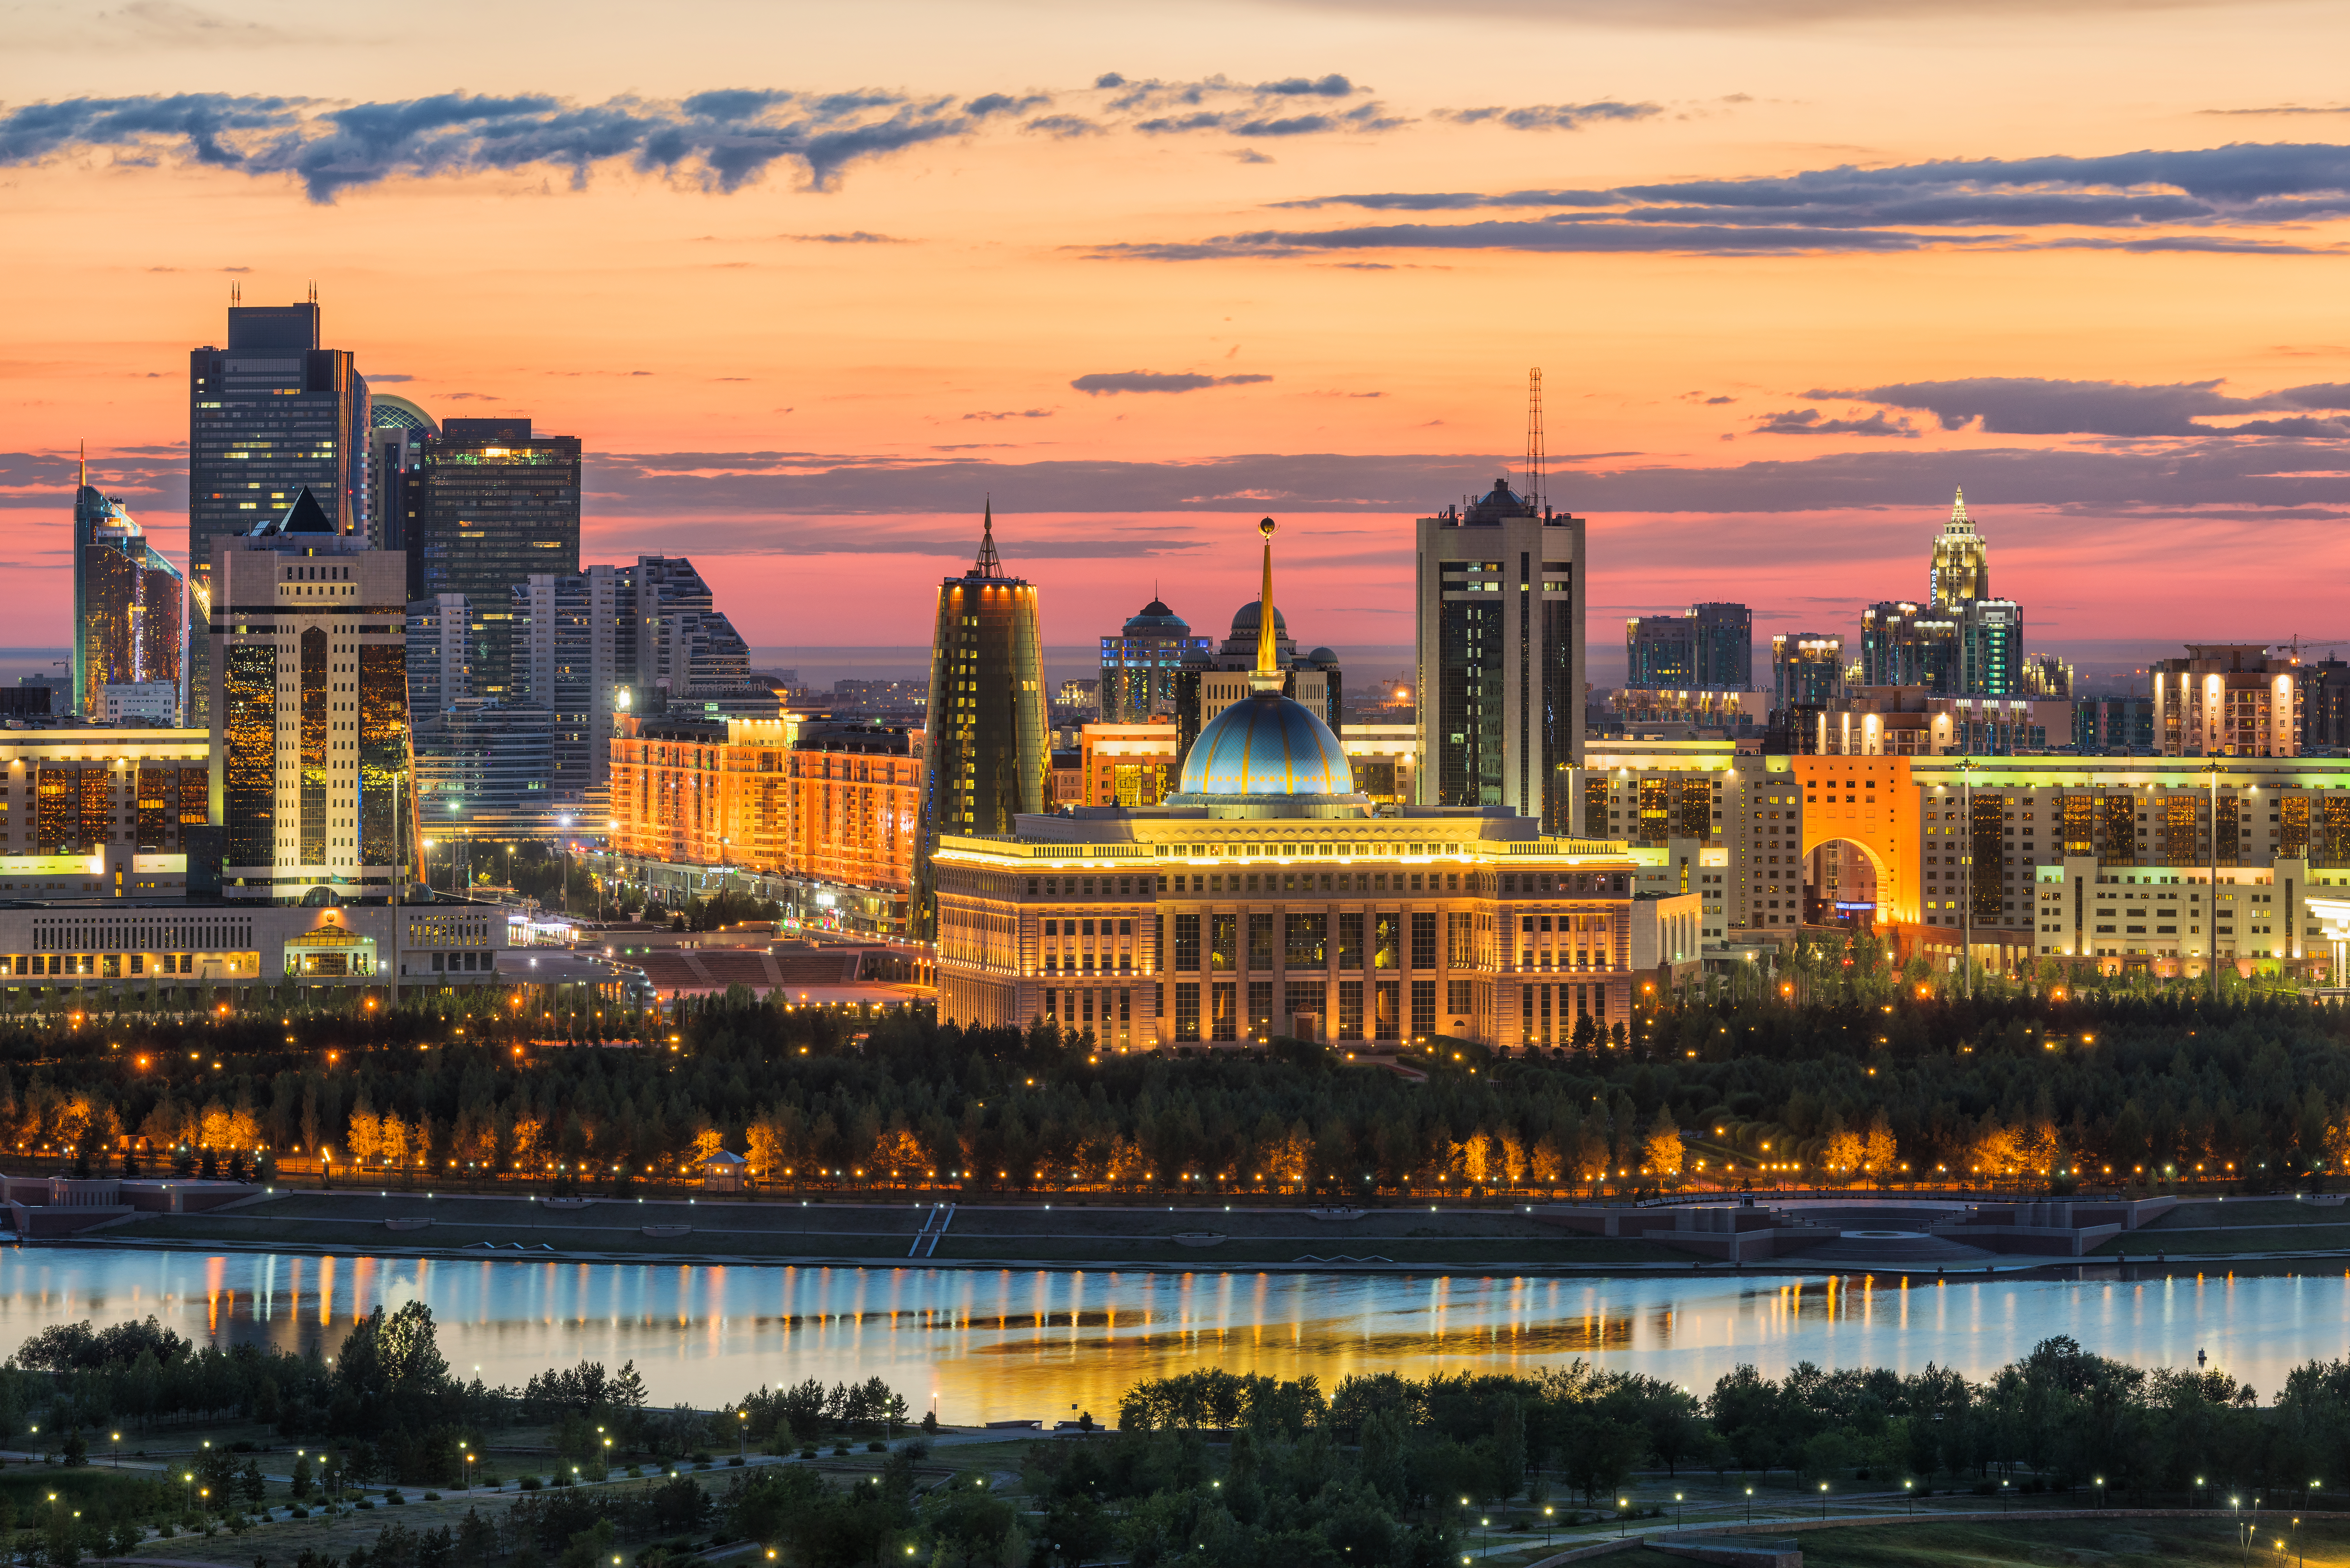 The Ak Orda Presidential Palace in front of the skyline of Nur-Sultan – © MaxZolotukhin / Shutterstock